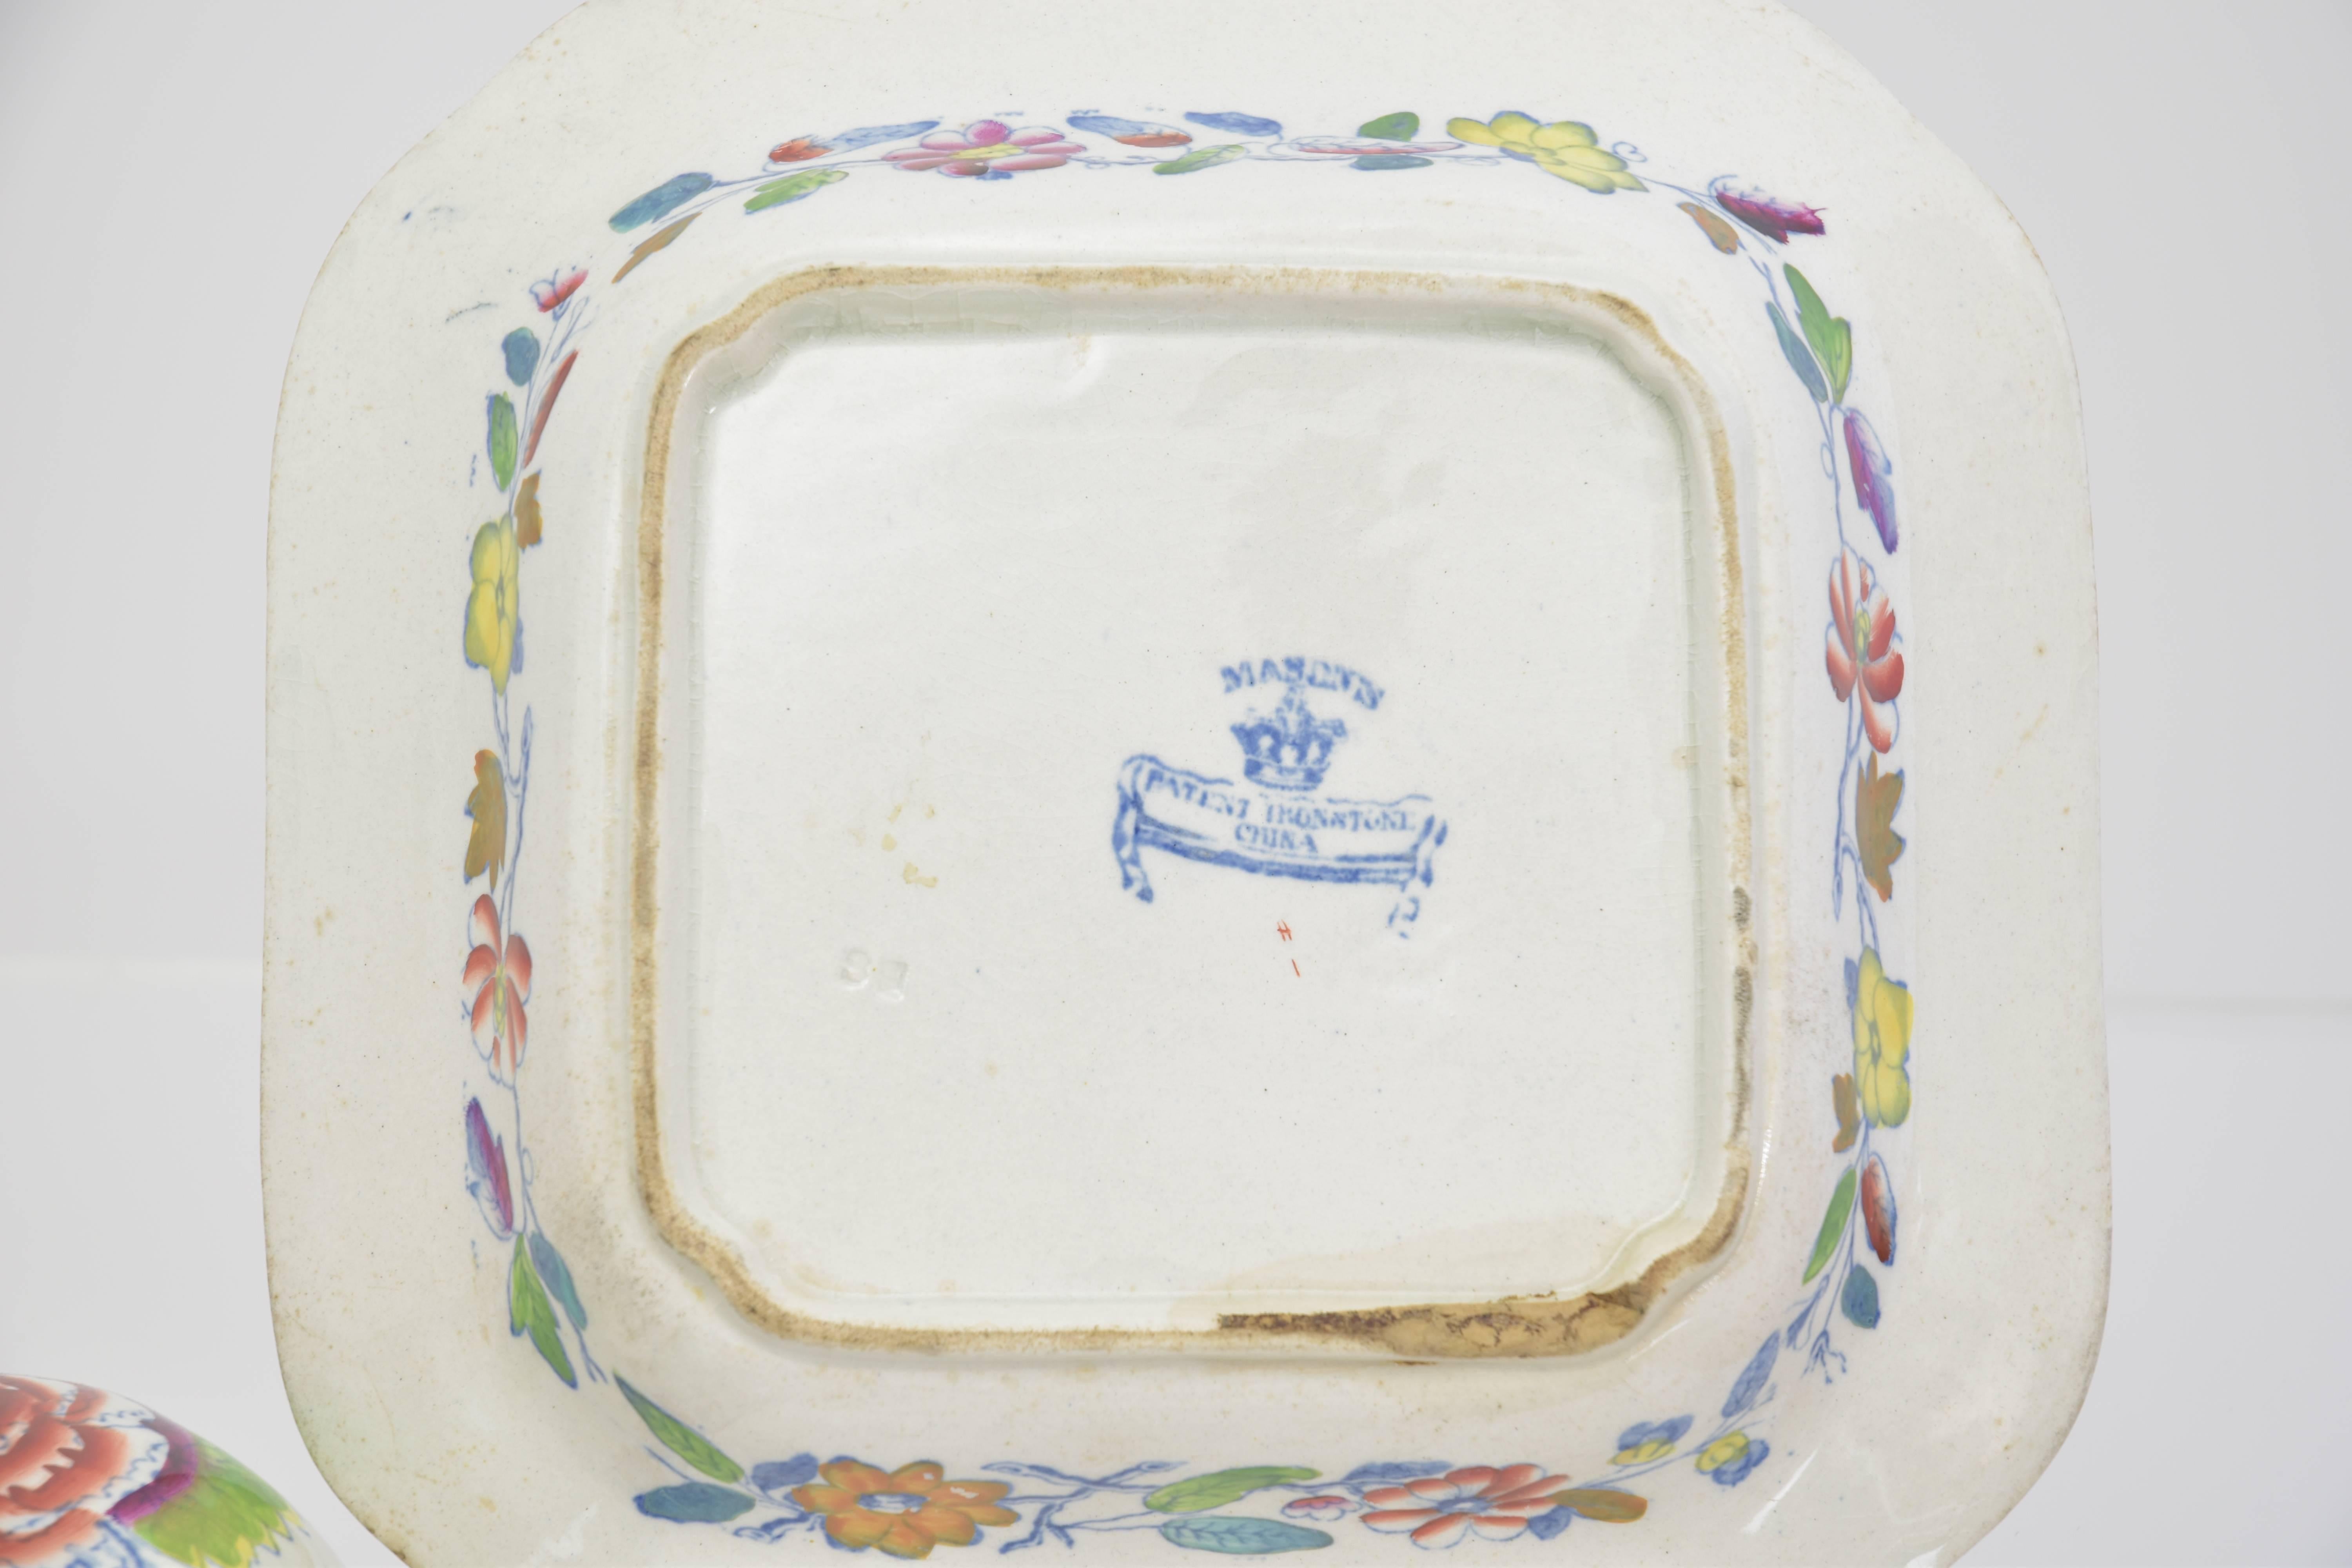 Covered dish in a square shape with flying bird and floral decoration.